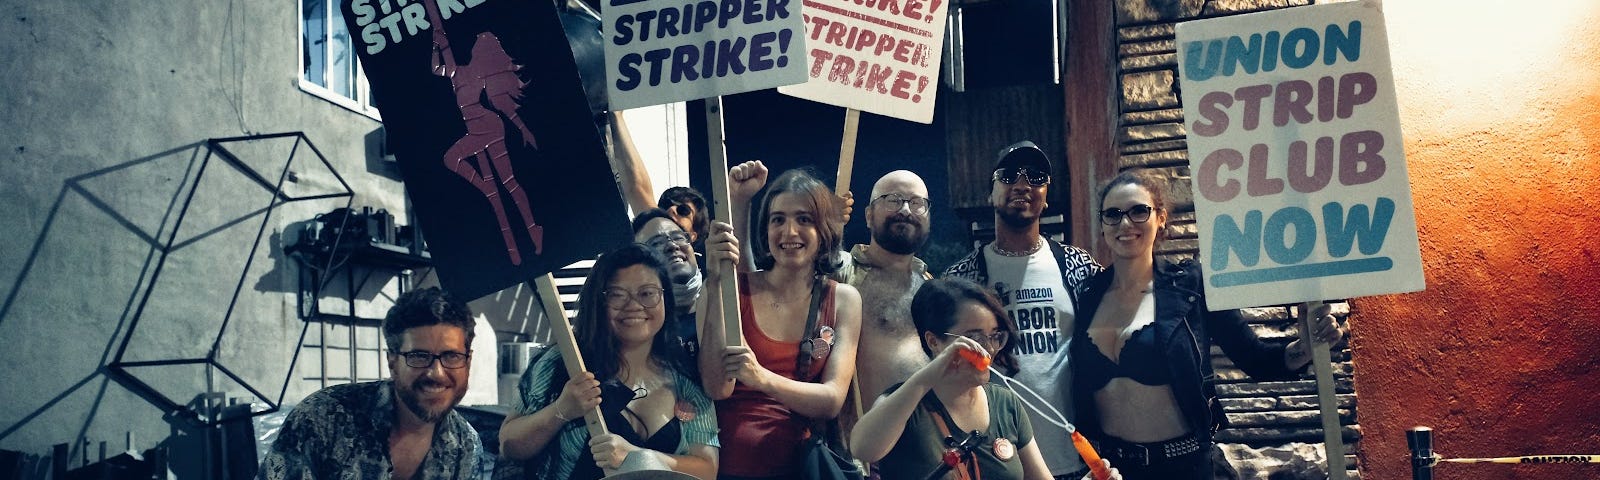 A group of video game workers and allies pose for a photo in front of the Star Garden Dive Bar. Workers hold colorful signs reading “STRIPPER STRIKE” and “UNION STRIP CLUB NOW.” Amazon Labor Union president Chris Smalls is also present